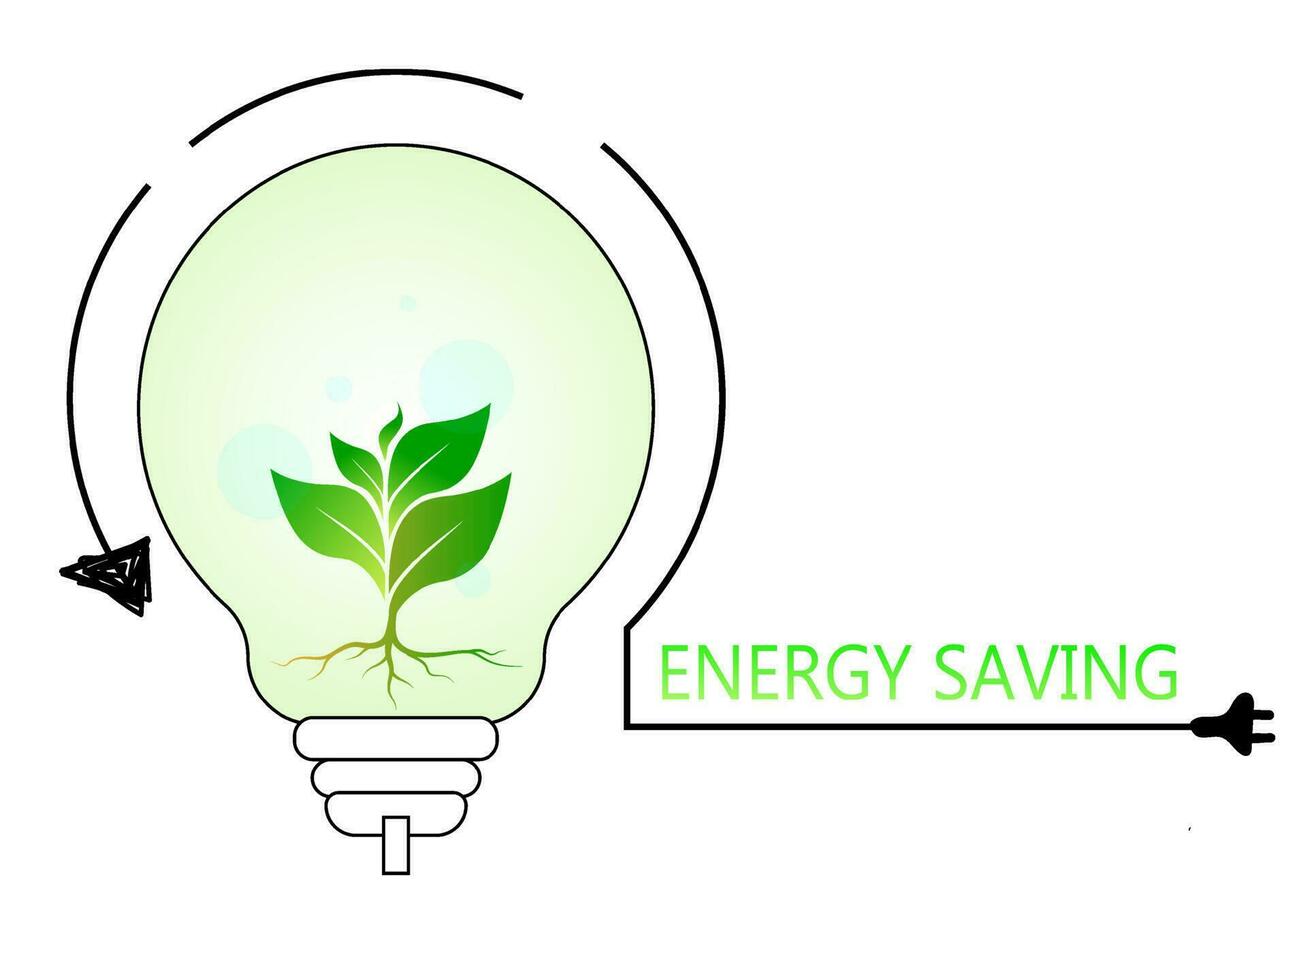 Energy saving sign or Icon. Can be used to illustrate. vector